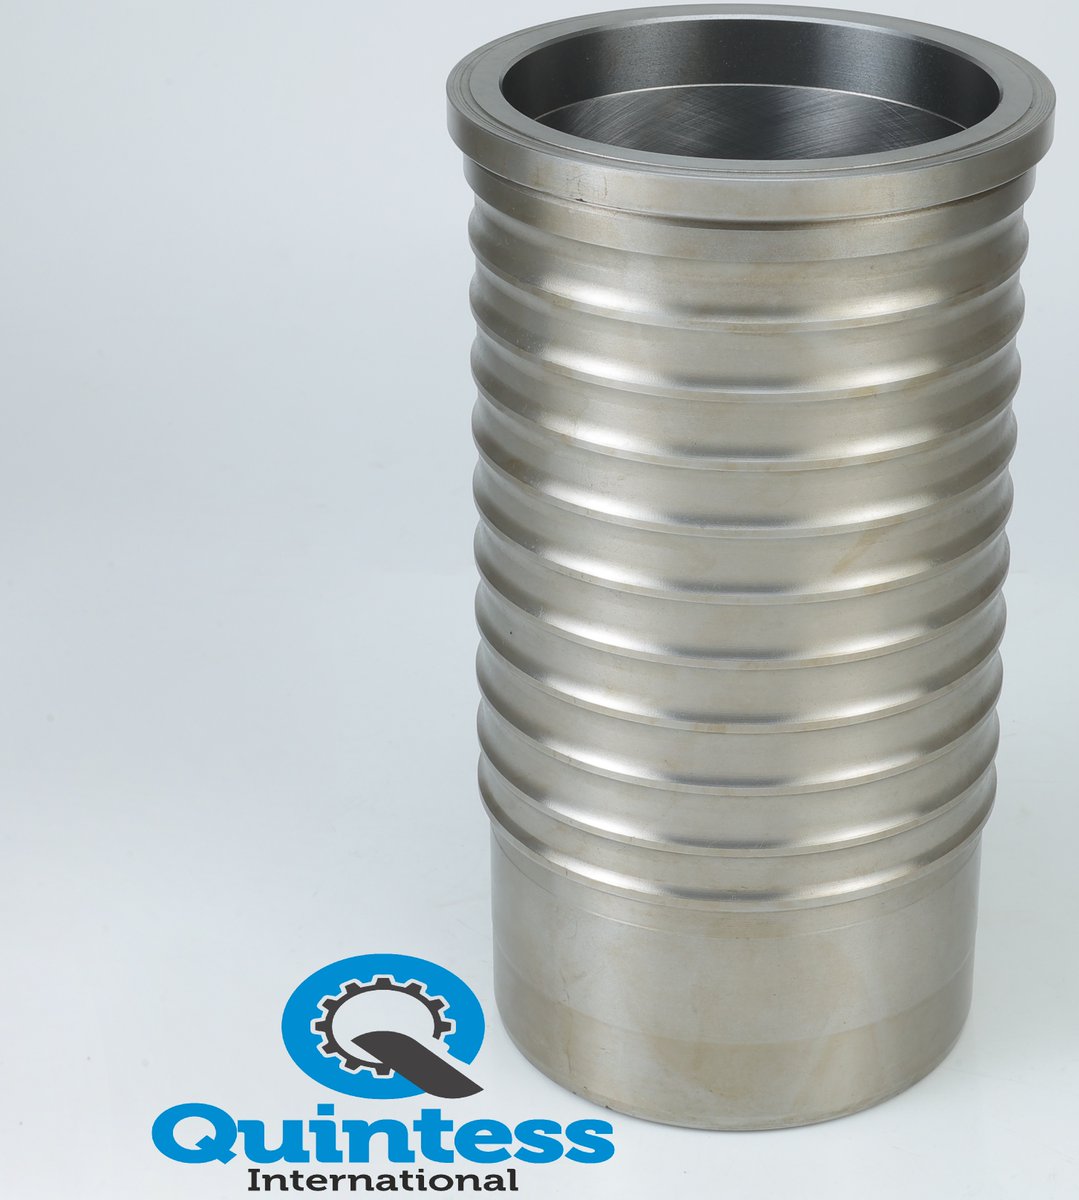 Plateau Honed Cylinder Liner Scania DS6  061wn13 in Frame. European Trucks Engine Parts Buyer Order it on 
917862060745 or exim@quintessinternational.in
#scania #europeantrucks #engineparts #cylinderliner #automechanikadubai #WAAS2022